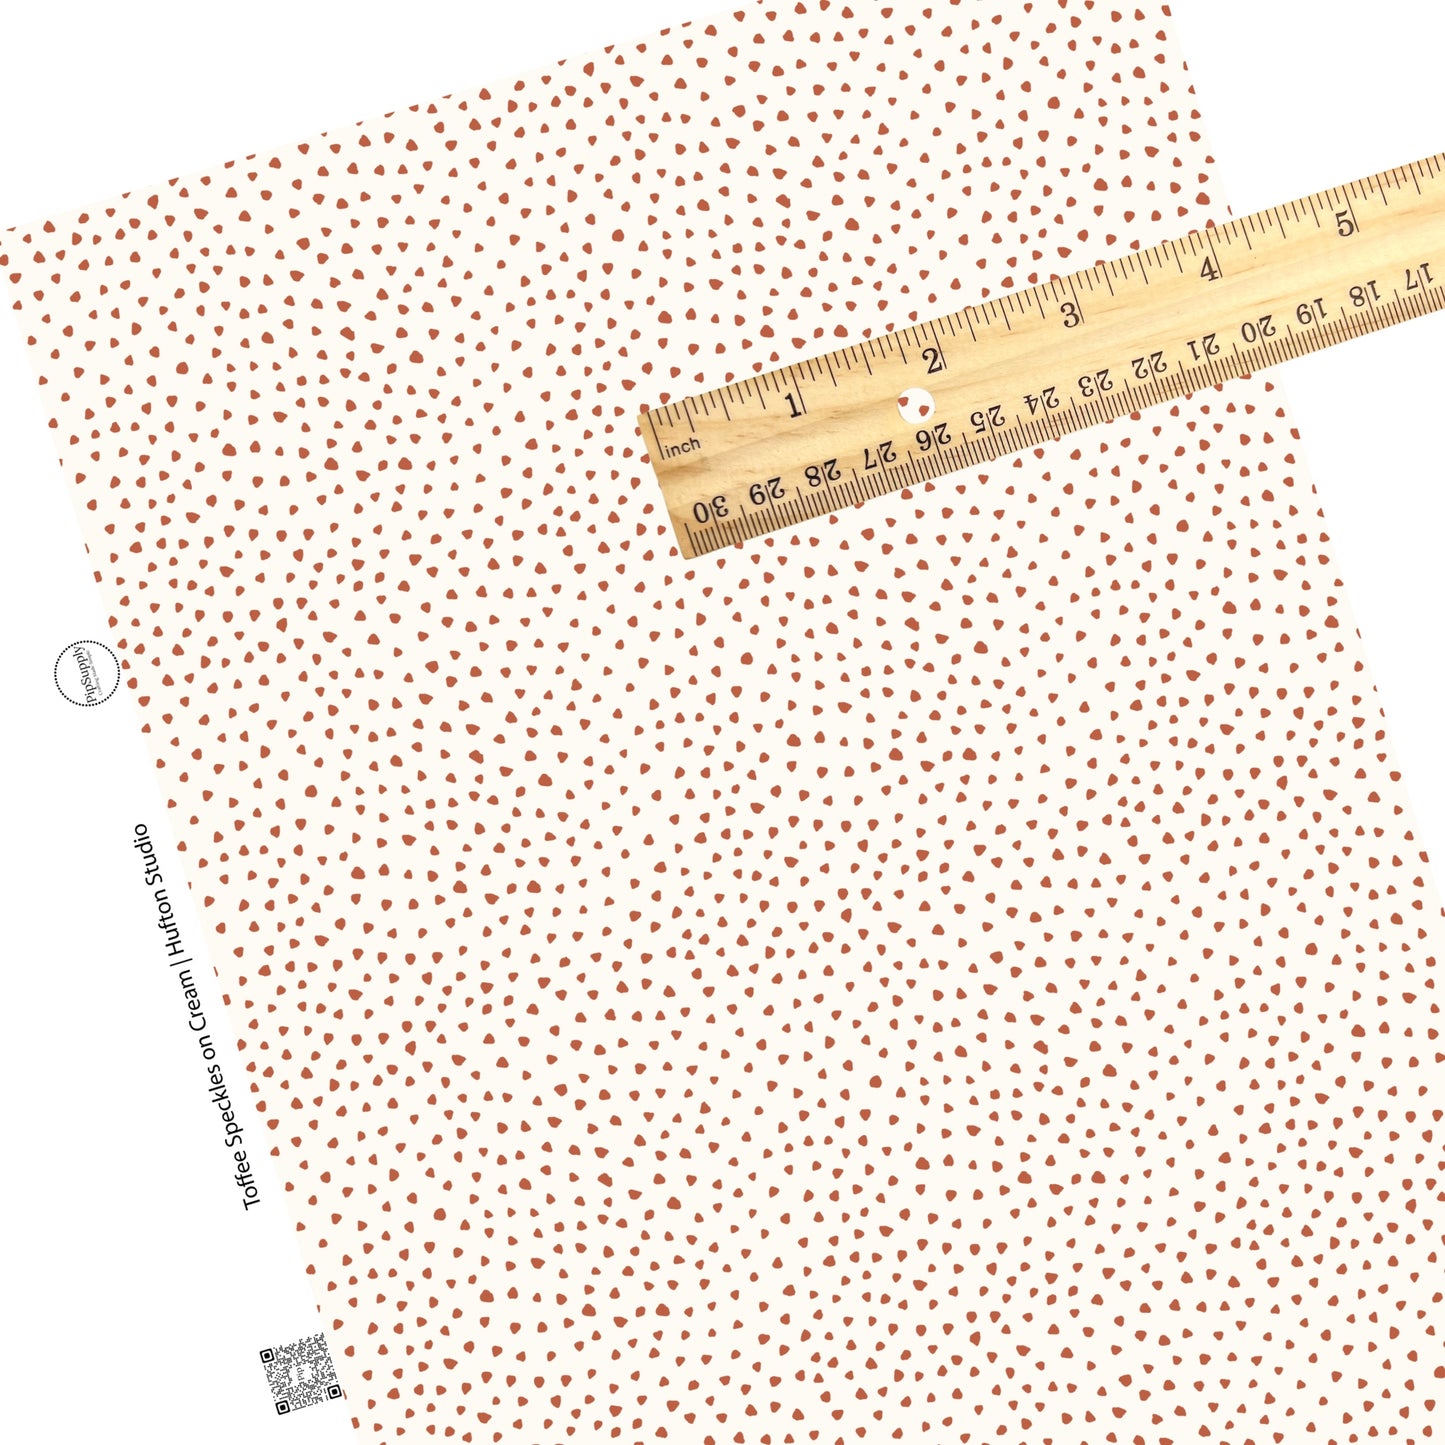 These speckled themed faux leather sheets contain the following design elements: small brown speckled dots on ivory. Our CPSIA compliant faux leather sheets or rolls can be used for all types of crafting projects.